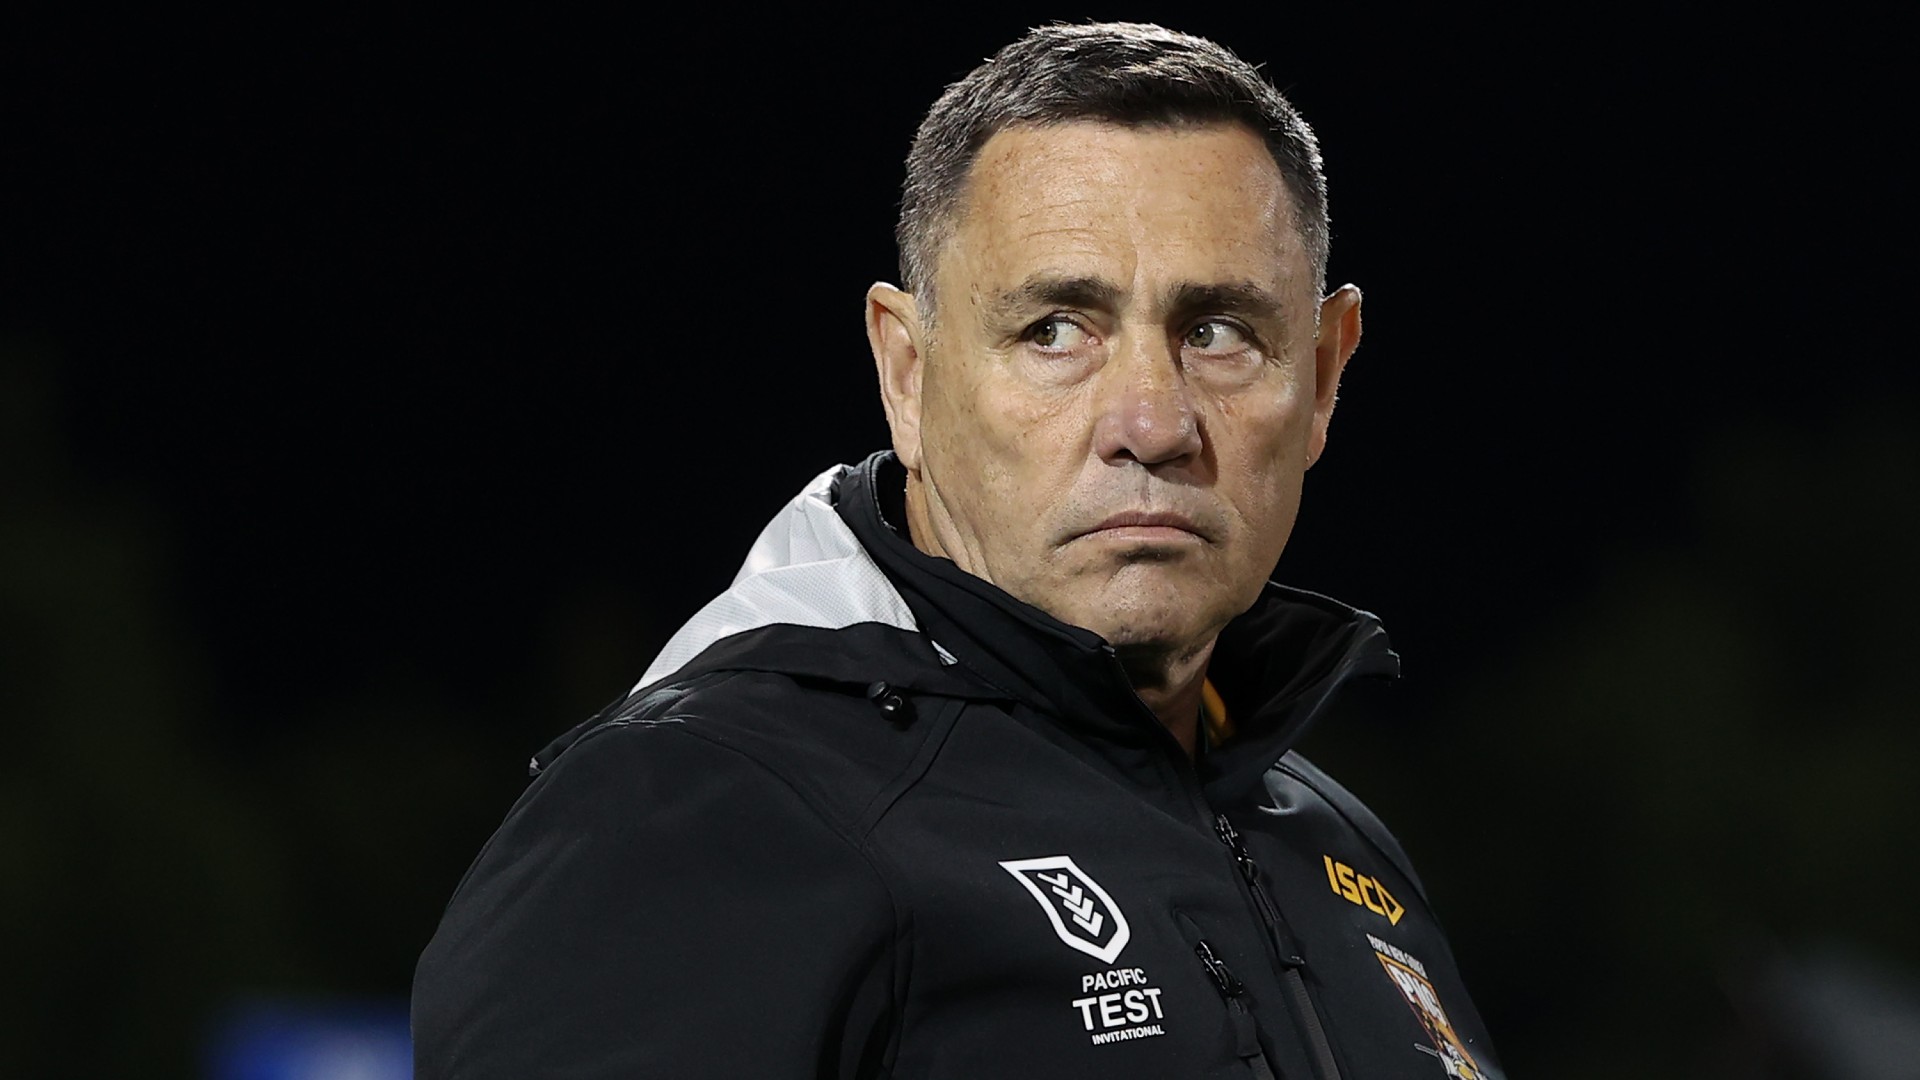 Manly Sea Eagles to appoint Shane Flanagan and Jim Dymock as assistants to Anthony Seibold